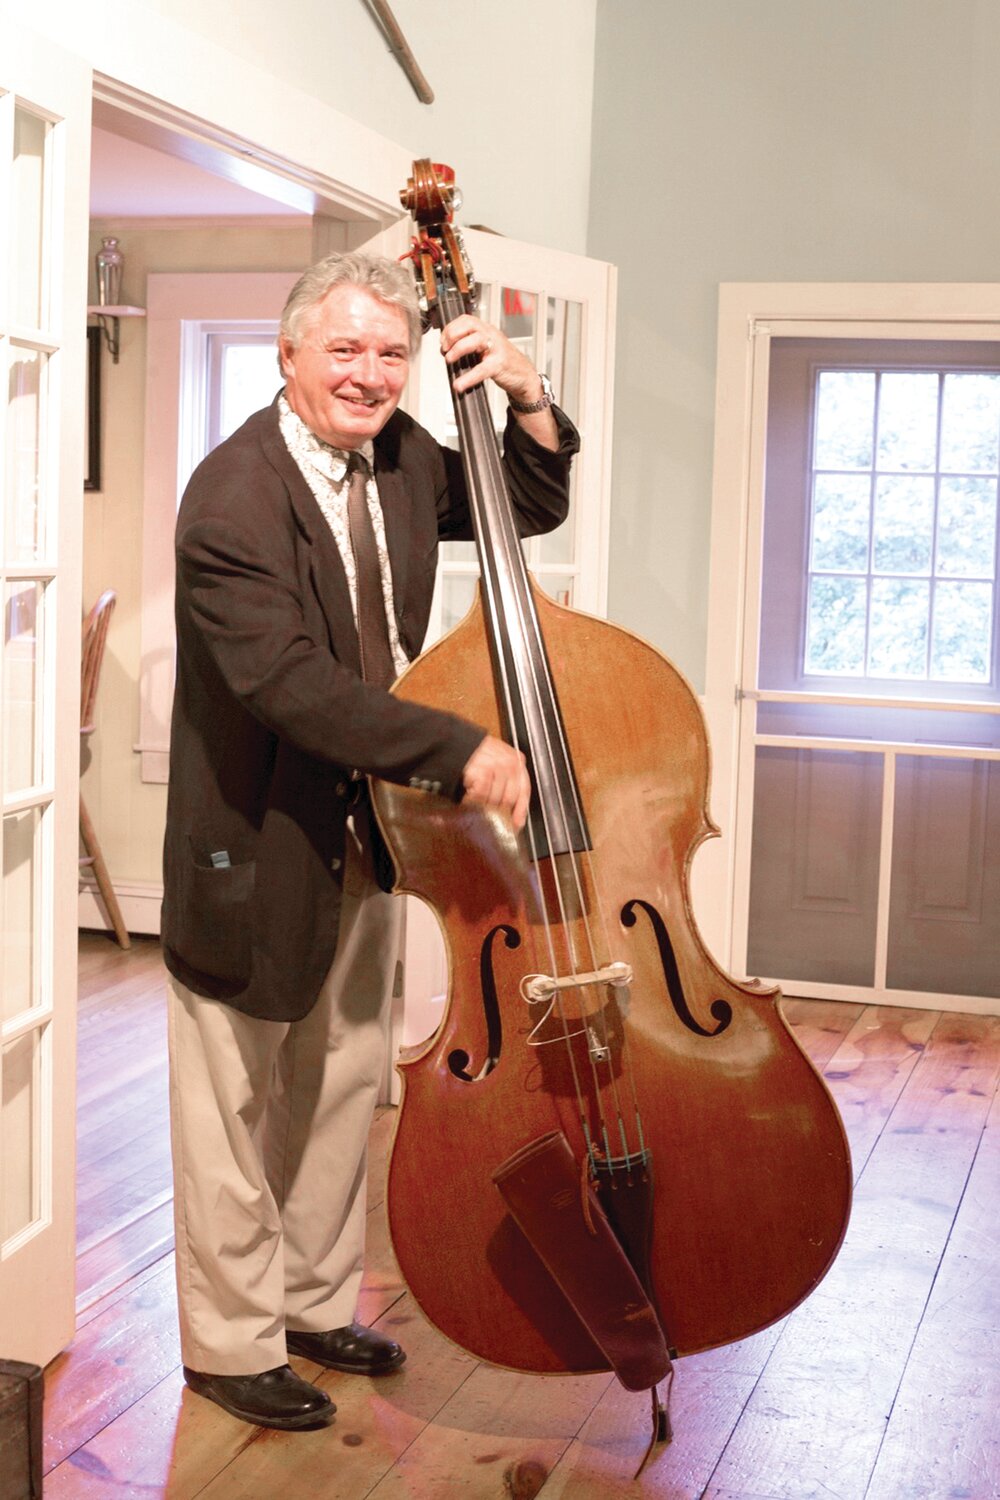 Glendon Ingalls plays double bass, among other instruments.